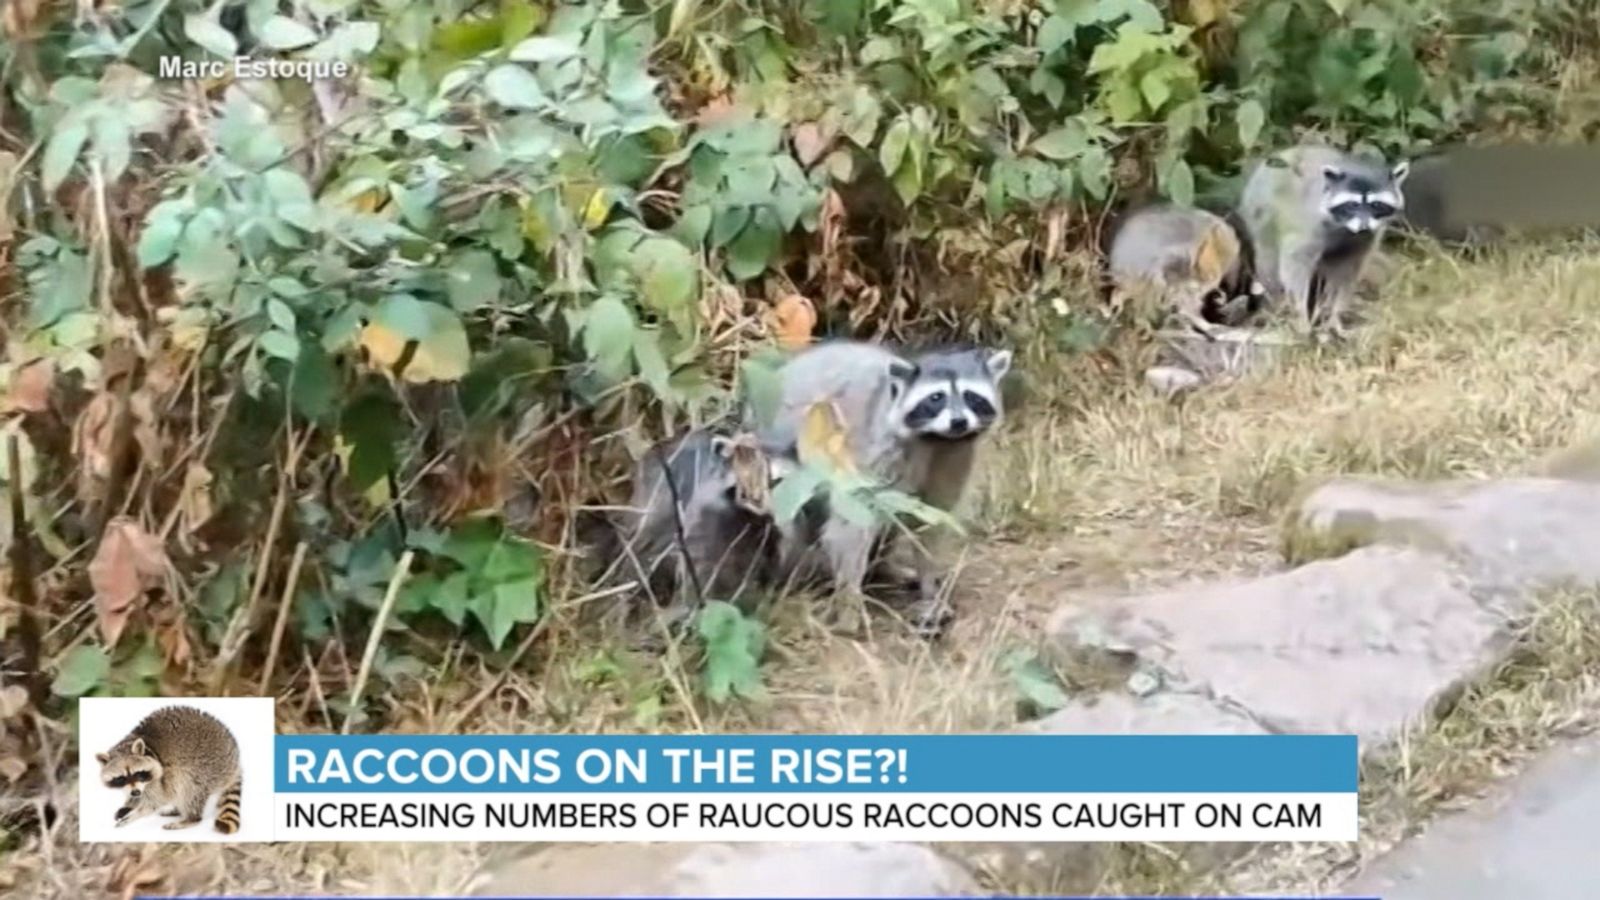 Raccoon encounters on the rise? - Good Morning America